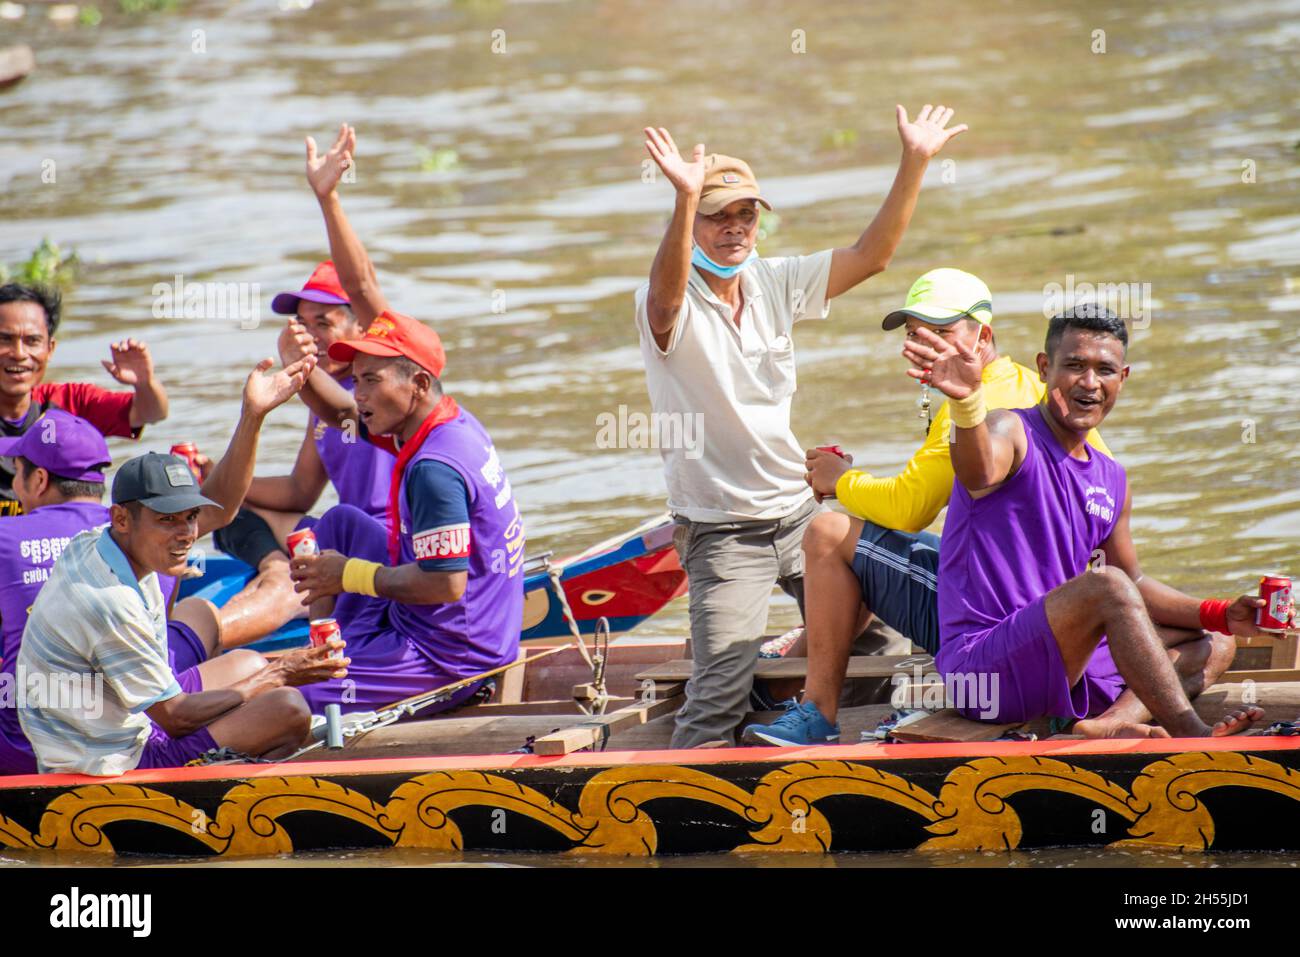 Khmer farmers participating in the traditional Ngo boat racing festival on the Maspero river Stock Photo